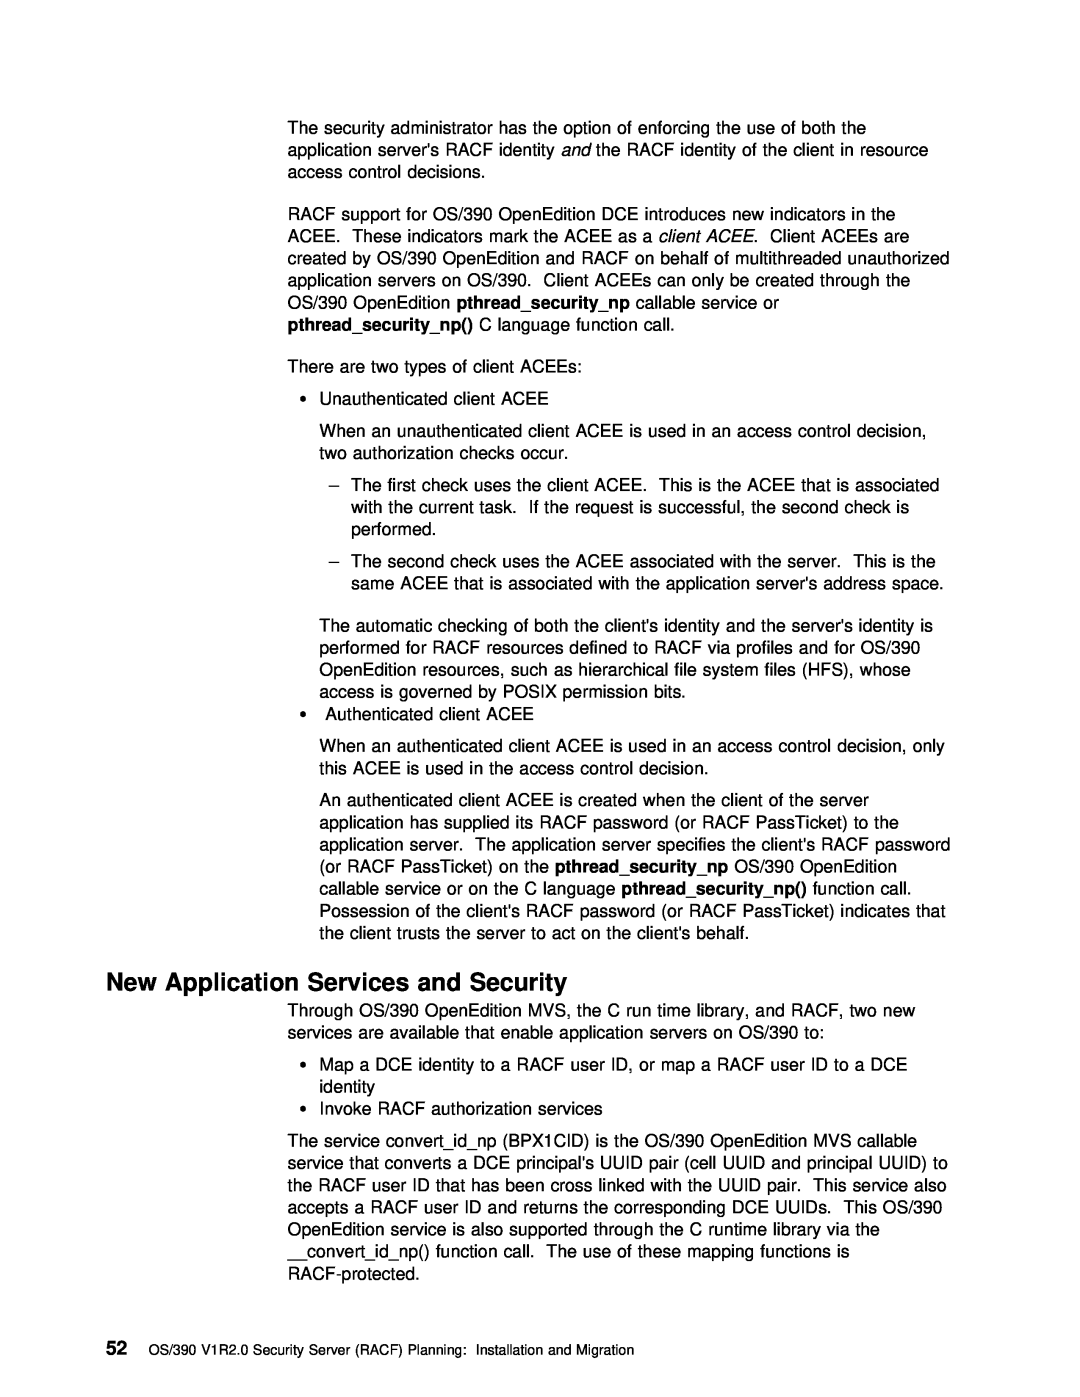 IBM GC28-1920-01 manual New Application Services and Security, pthread the securitynp 